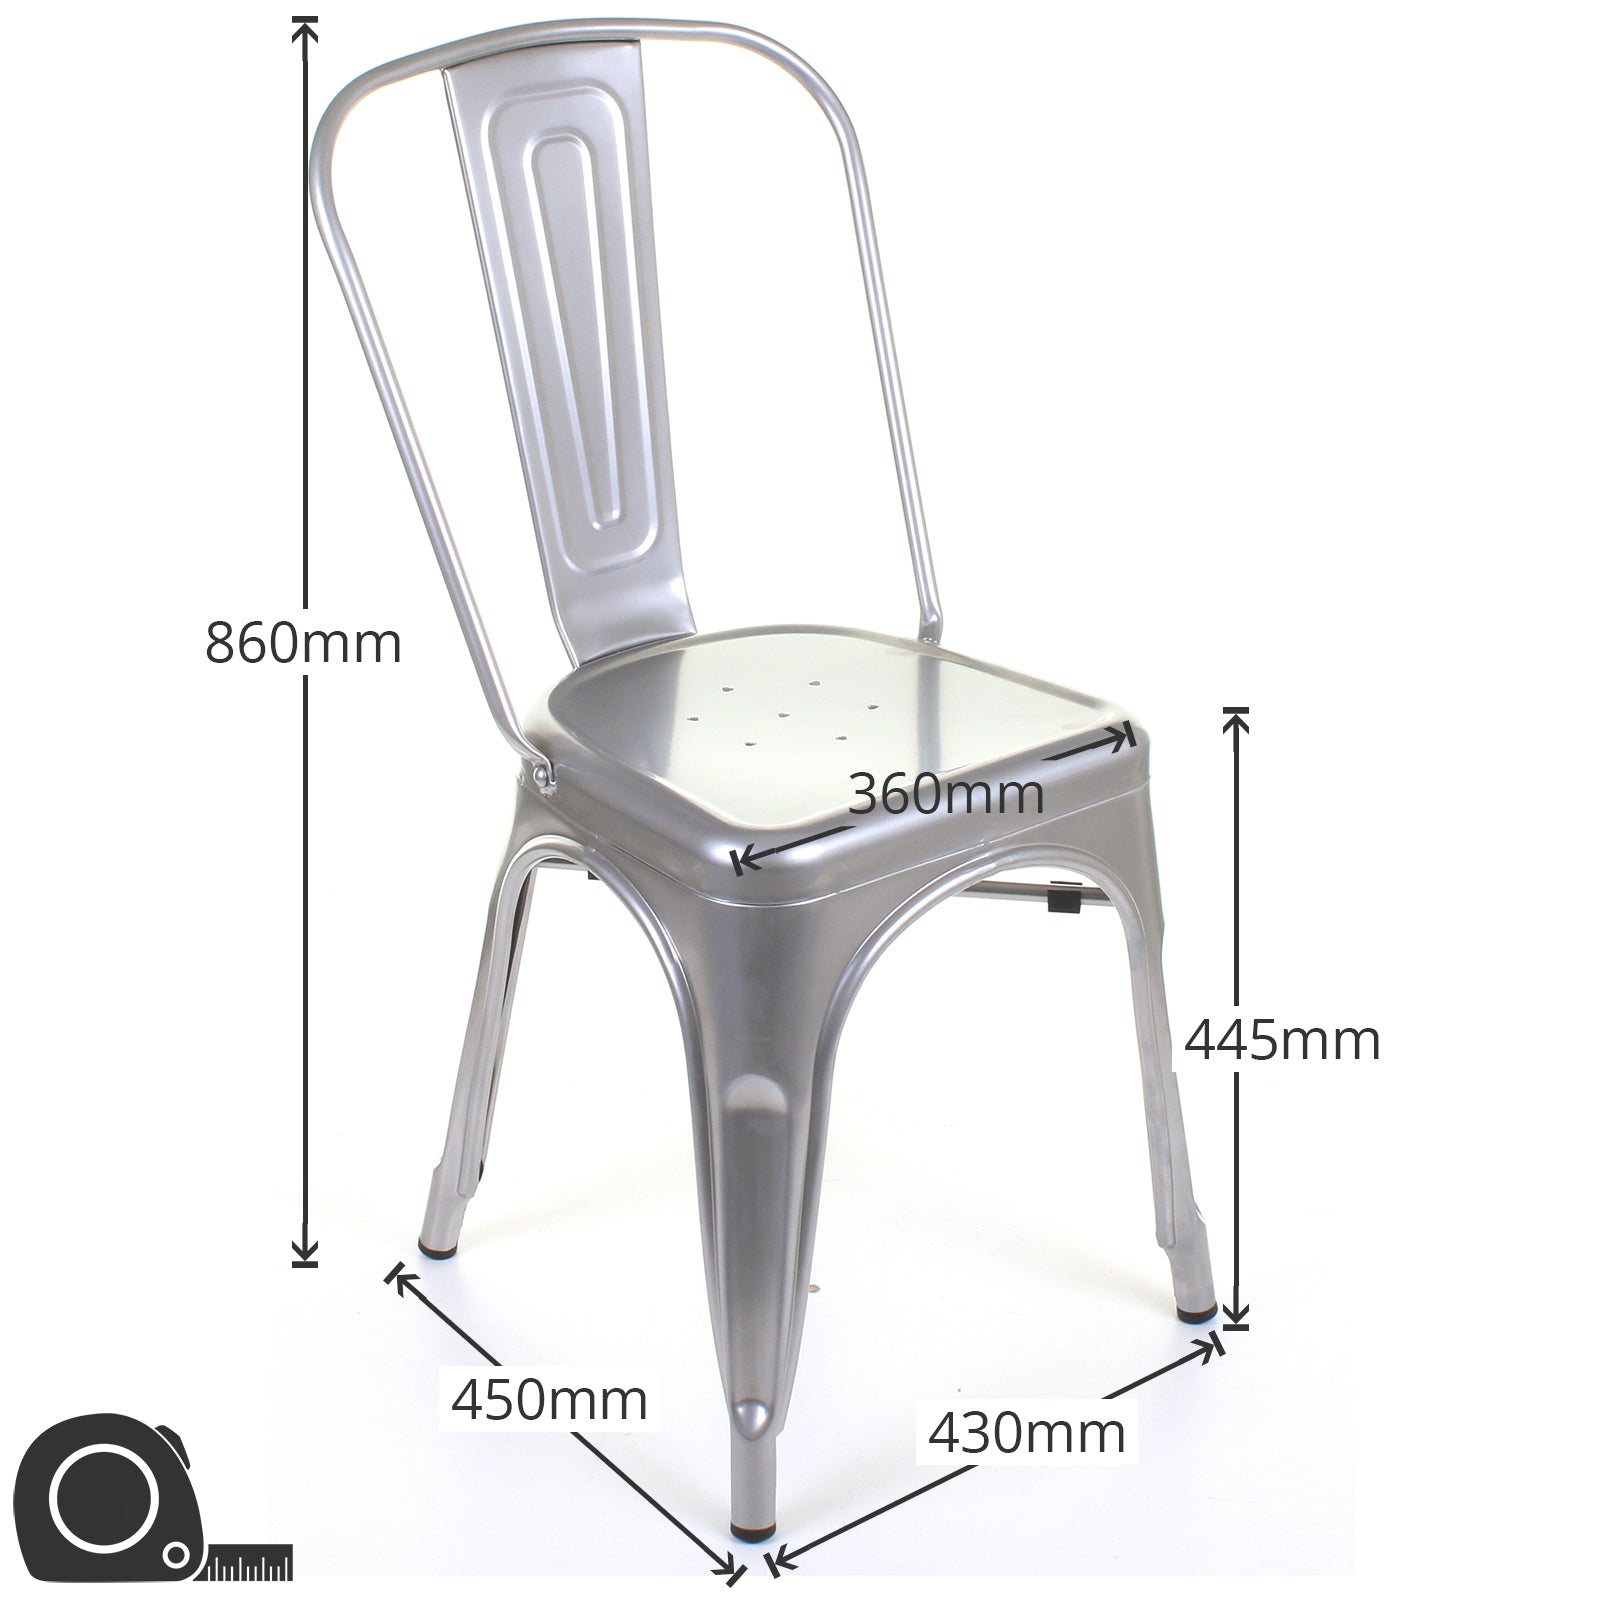 Siena Chairs - Silver